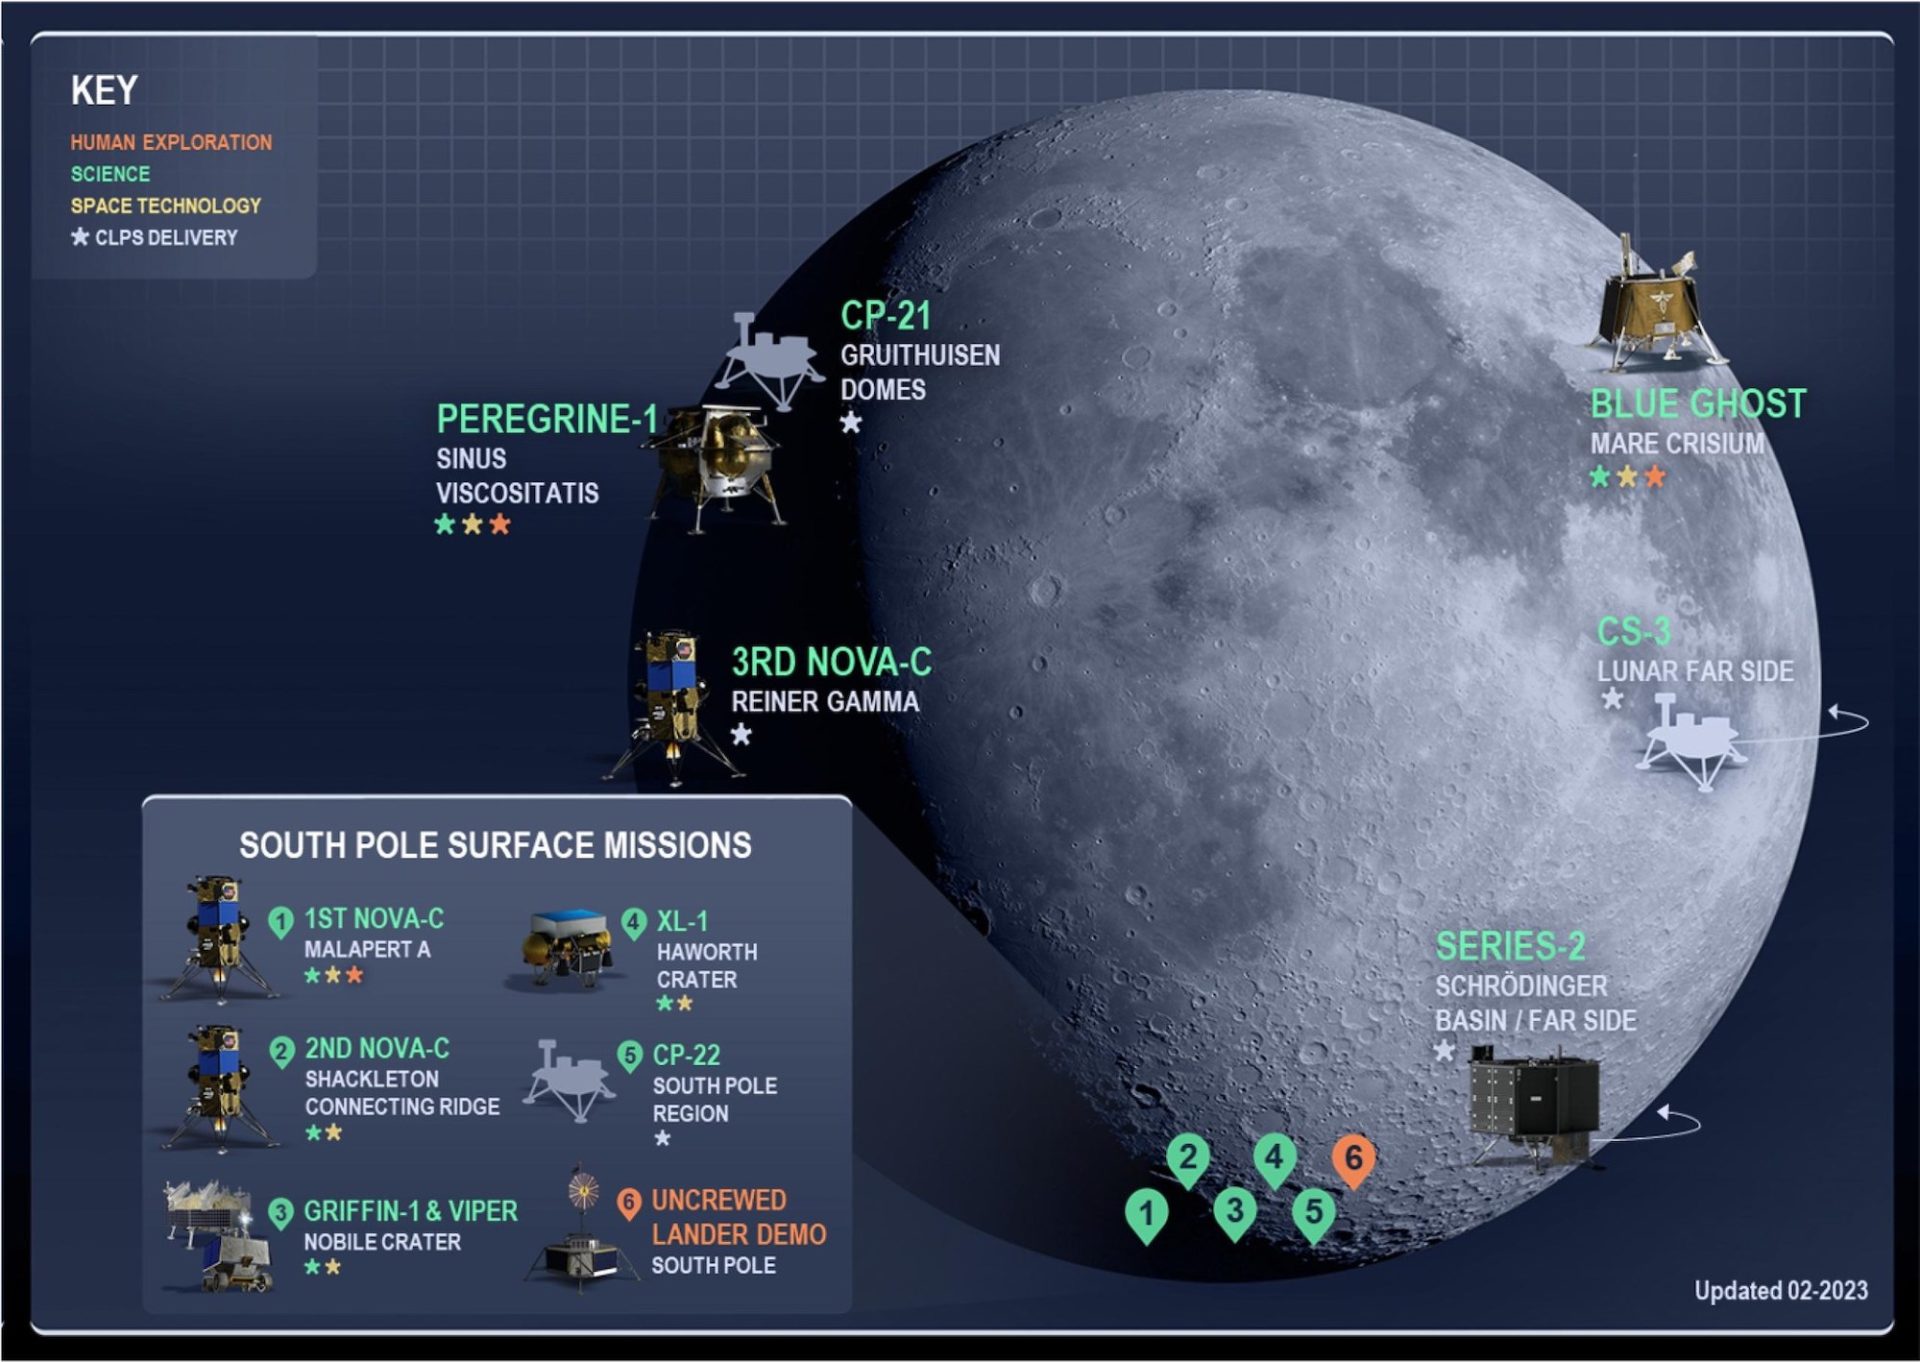 Artist’s infographic of planned flights through CLPS and their approximate landing locations on the Moon; includes name and image likeness of commercial CLPS landers. Credit: Jenny Mottar